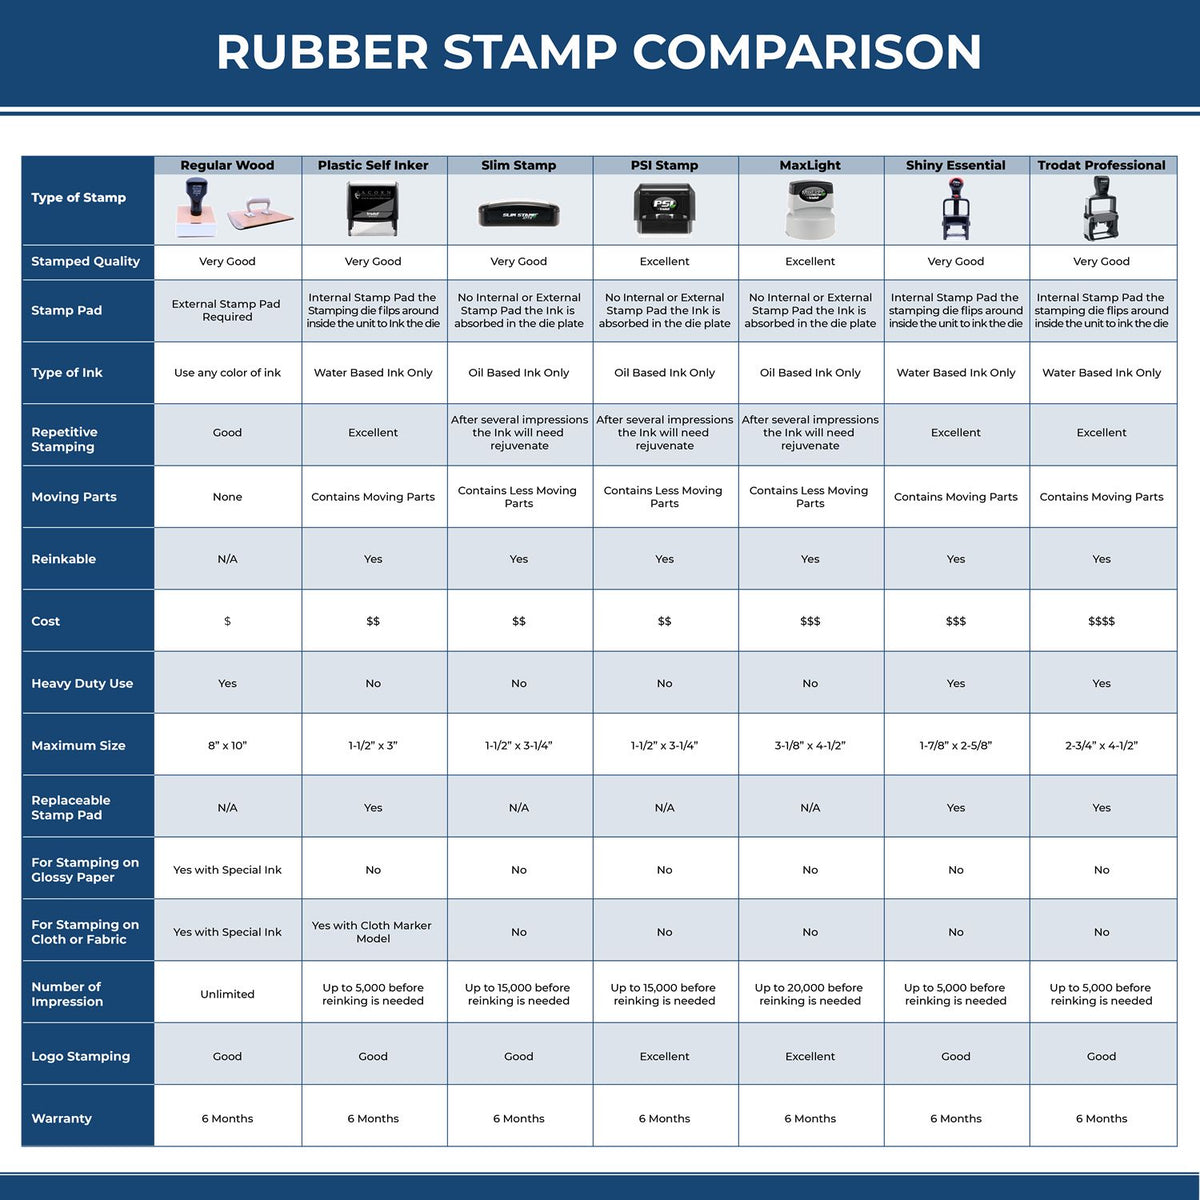 A comparison chart for the different types of mount models available for the Ohio Landscape Architectural Seal Stamp.